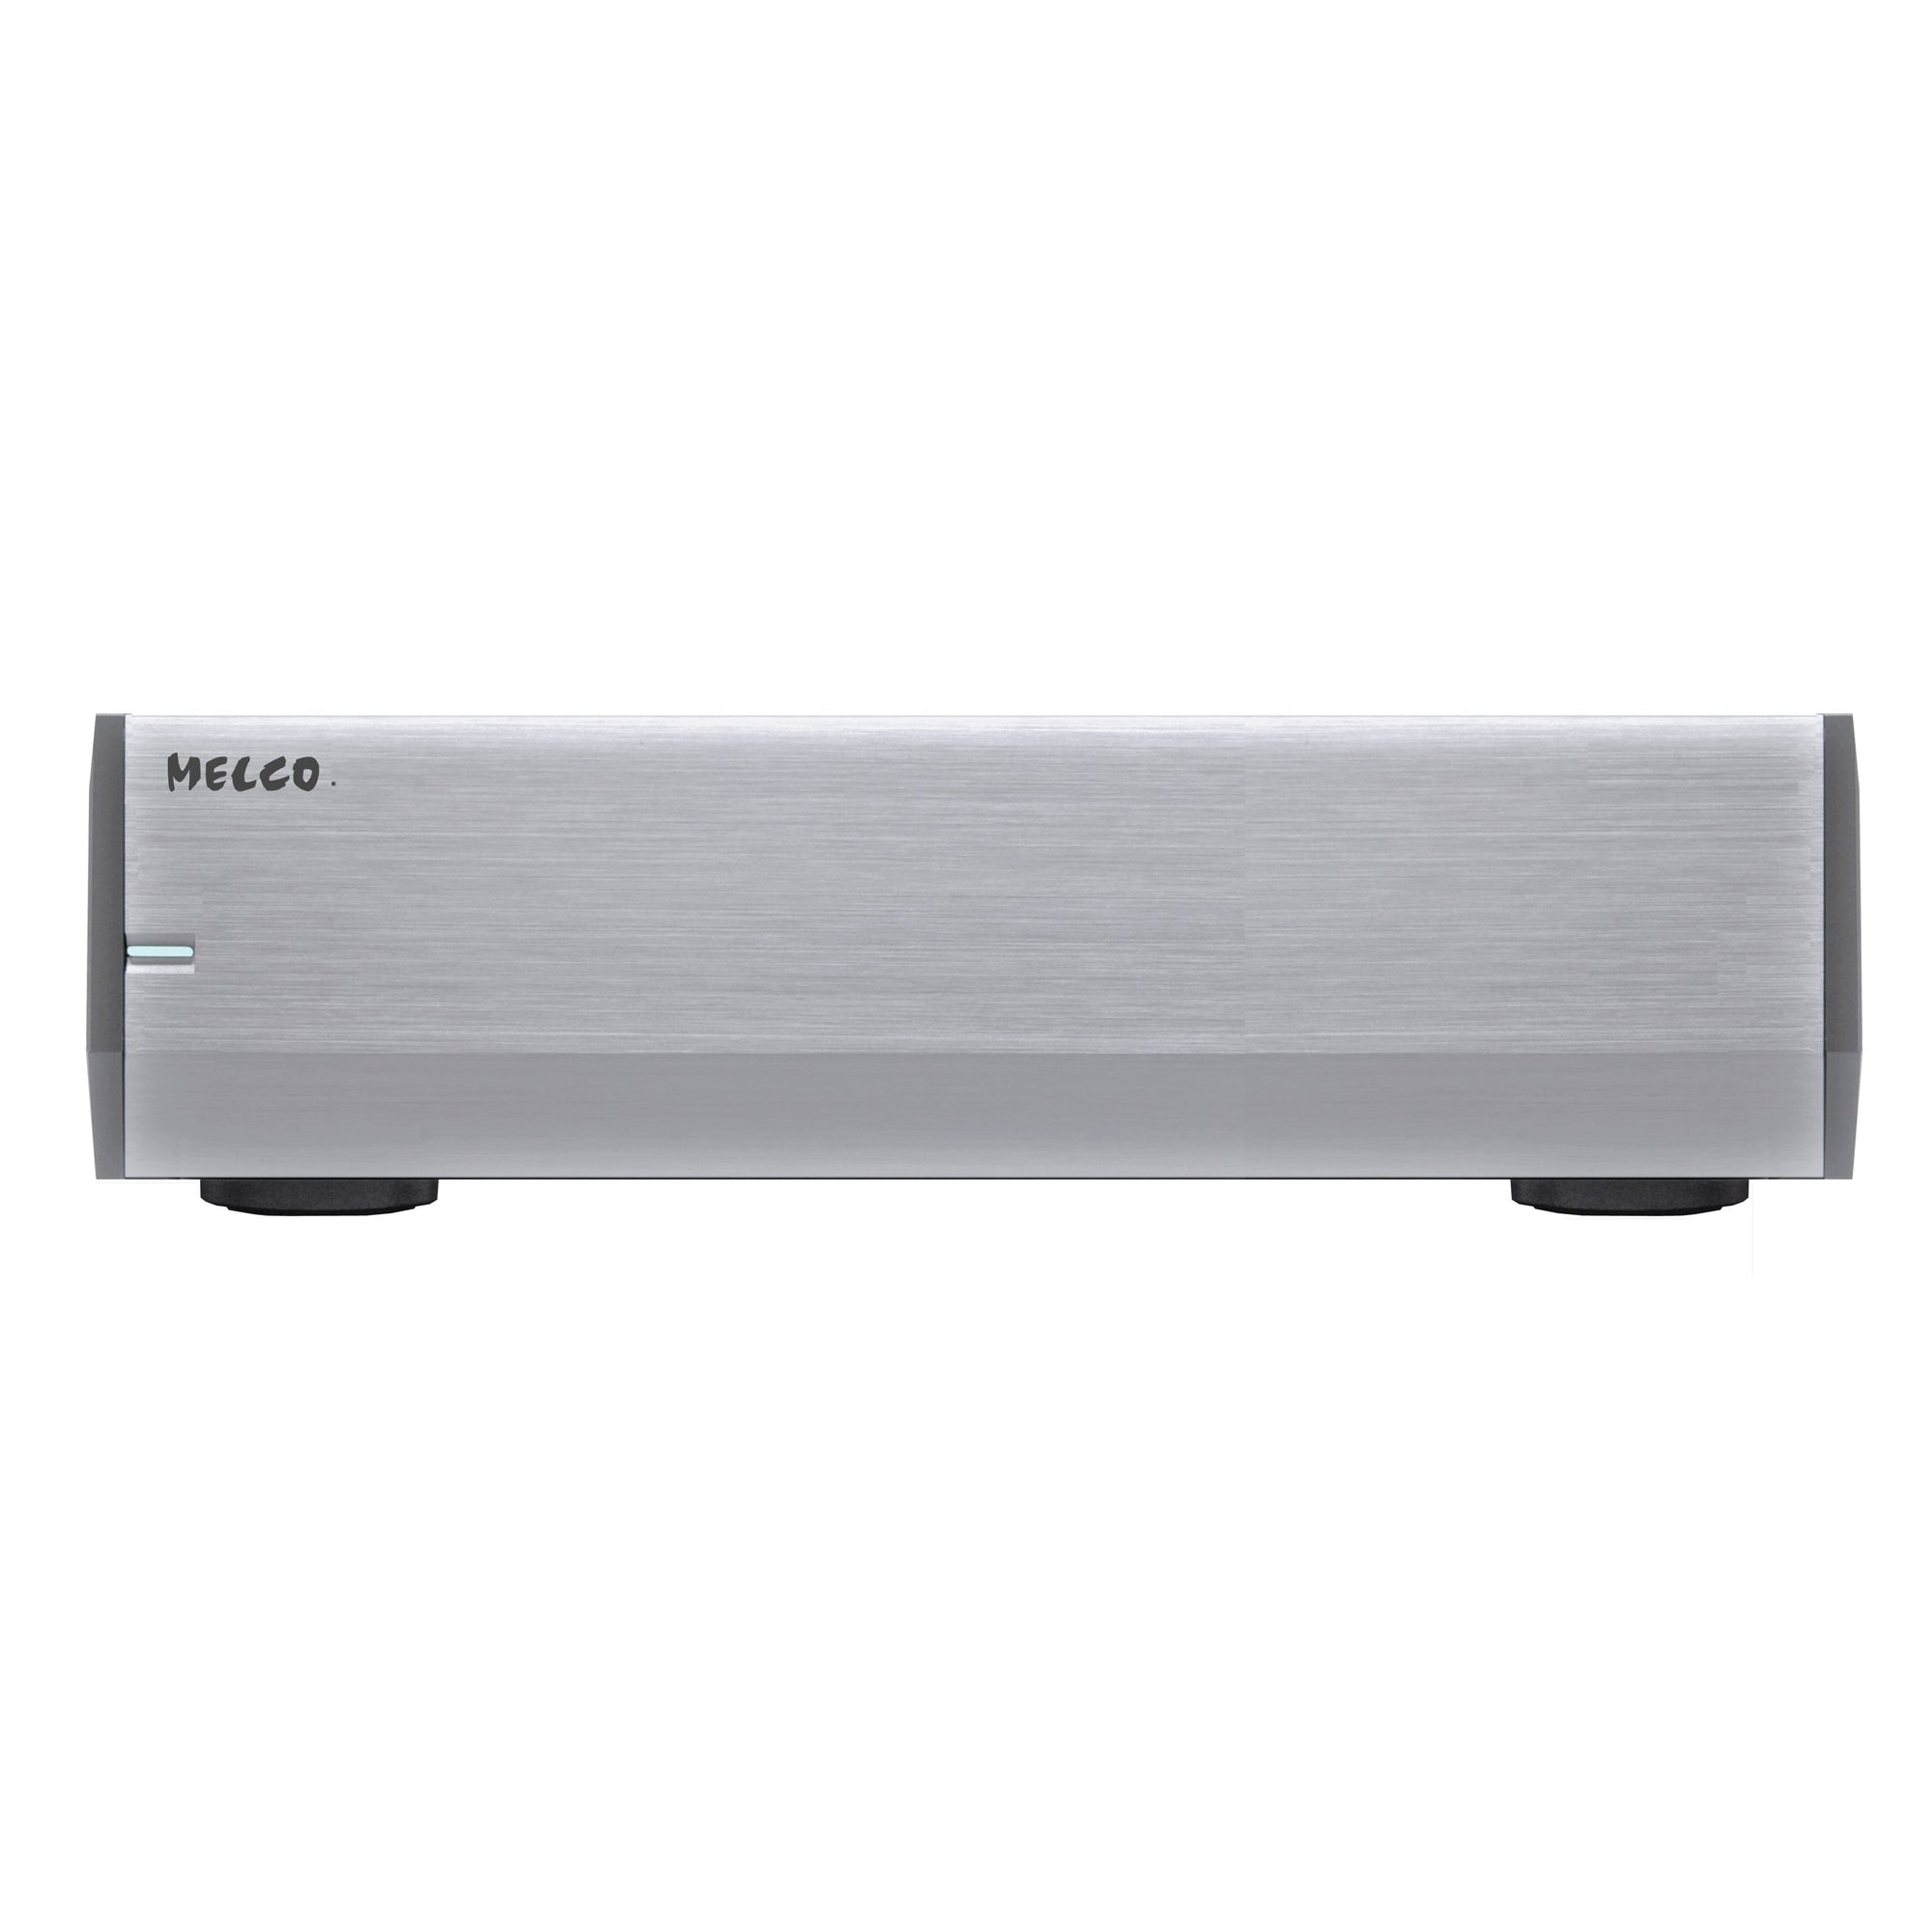 Melco - S10 - Data Switch